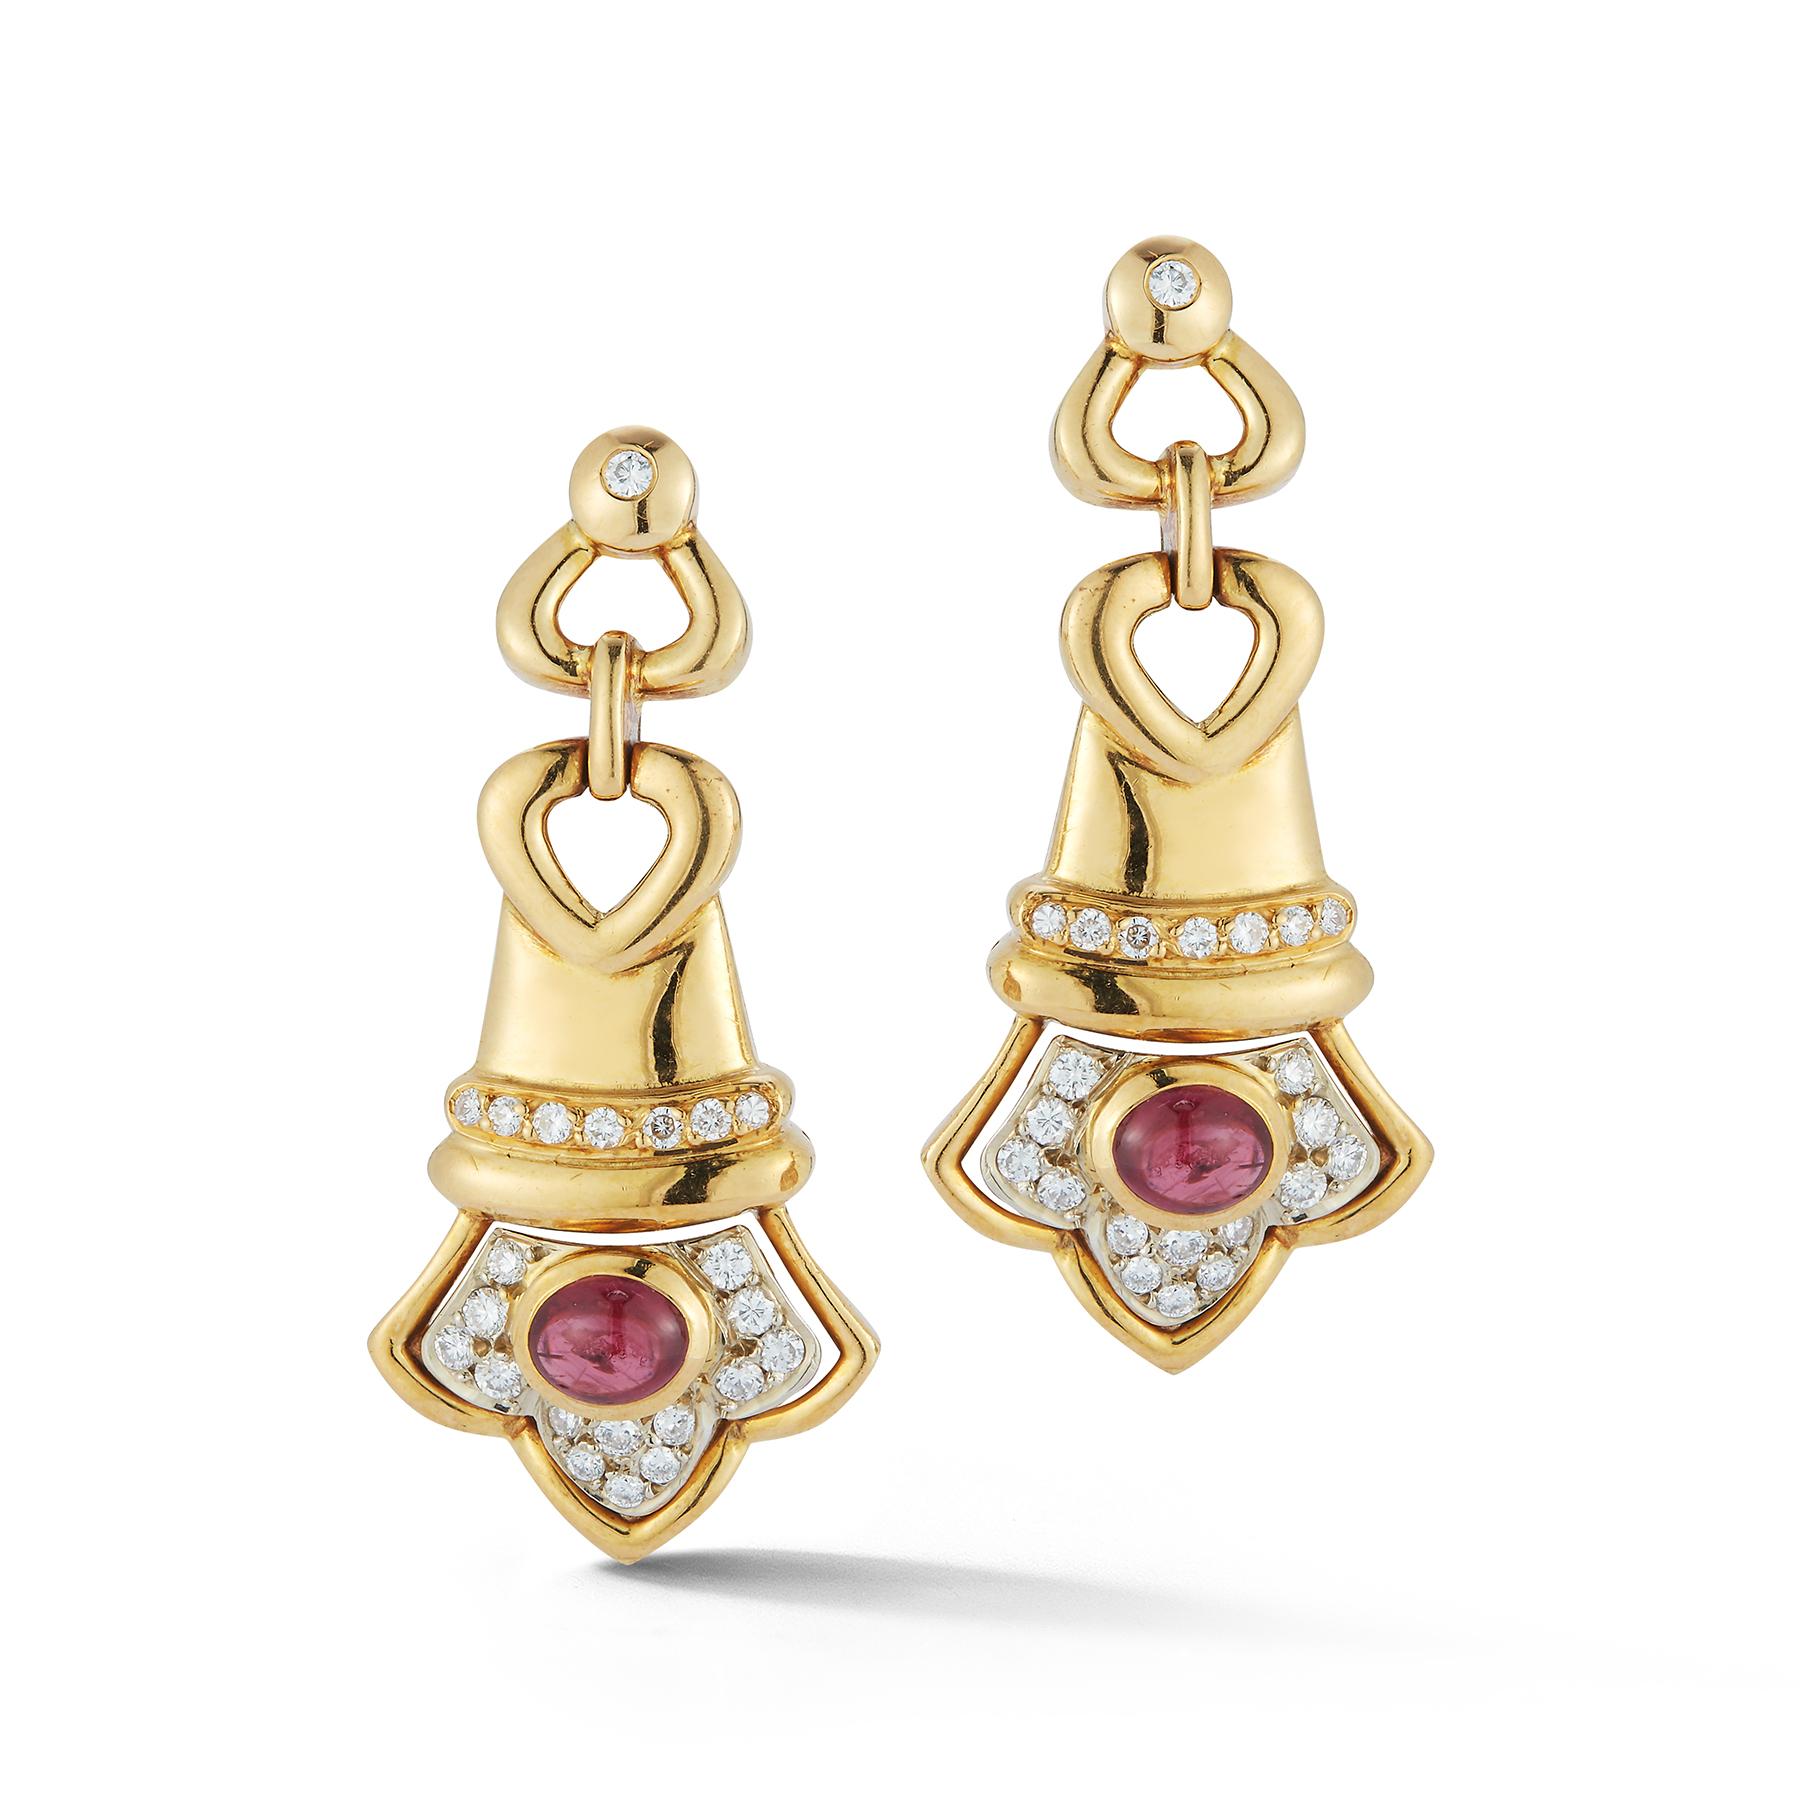 Cabochon Ruby & Diamond Earrings, 2 cabochon rubies approximately 1.18 cts &  34 round diamonds approximately .080 cts

Measurements: 1.5